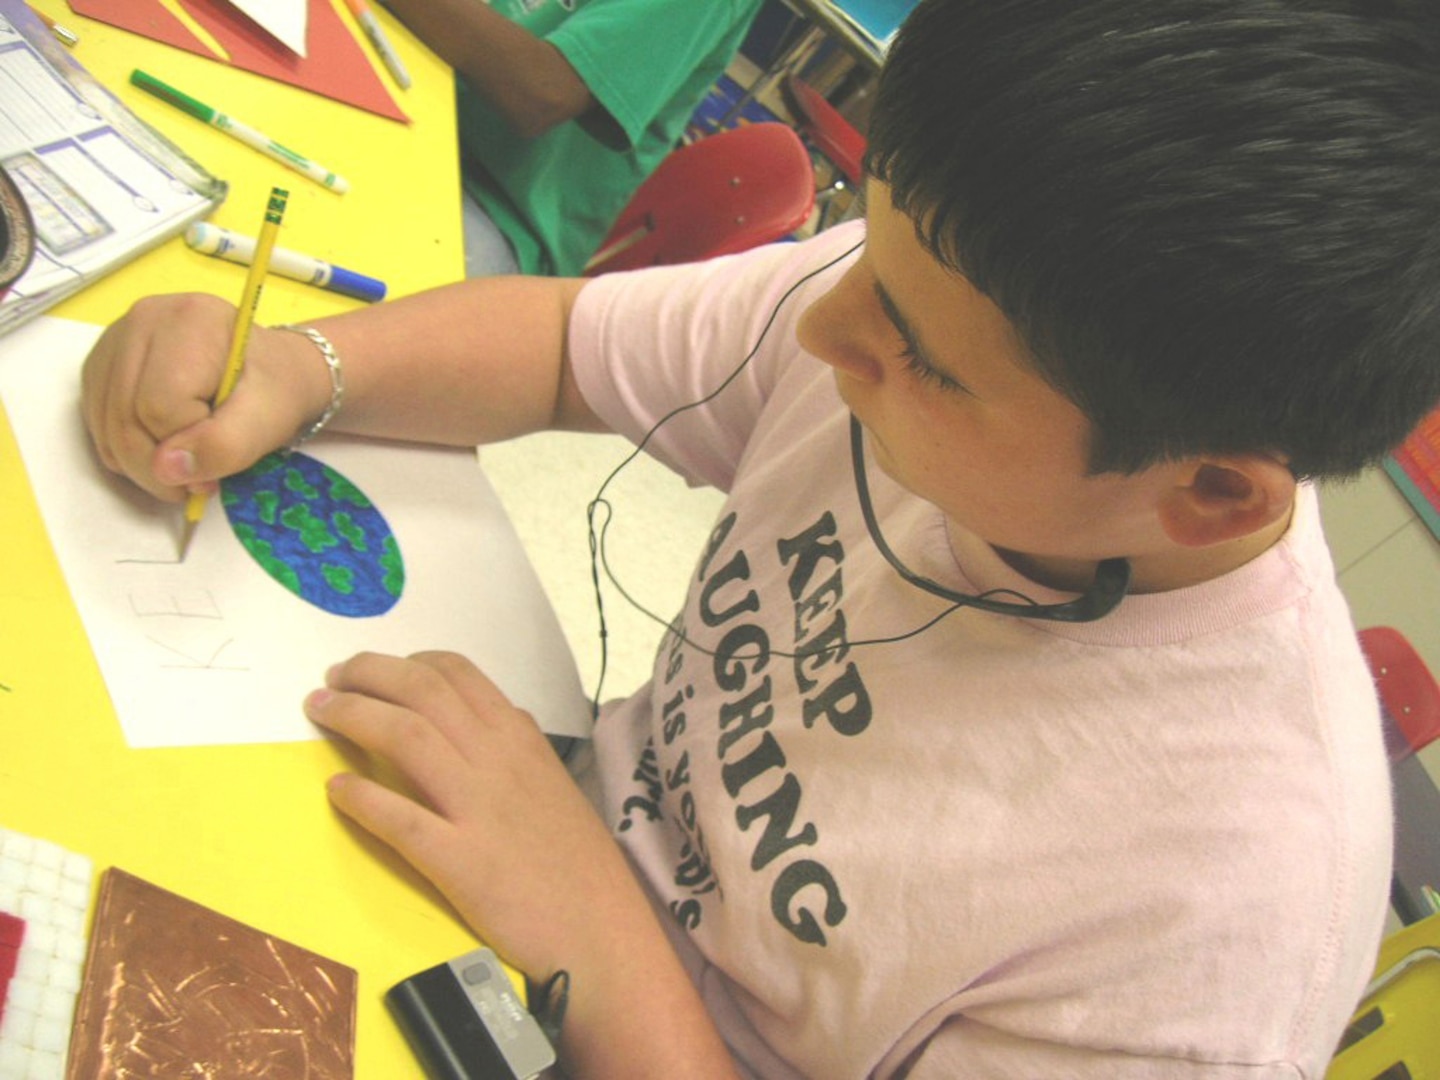 Lane Coquillette, a sixth-grader at Lackland Elementary School, Lackland Air Force Base, Texas, switches from markers to pencil for his Earth Day drawing during art class April 12. The artwork will be taped to paper grocery bags and distributed at the commissary in observance of Earth Day. Lane is the son of Melissa and Capt. Shane Banks, 59th Surgical Operations Squadron. (USAF photo by David Garcia)
